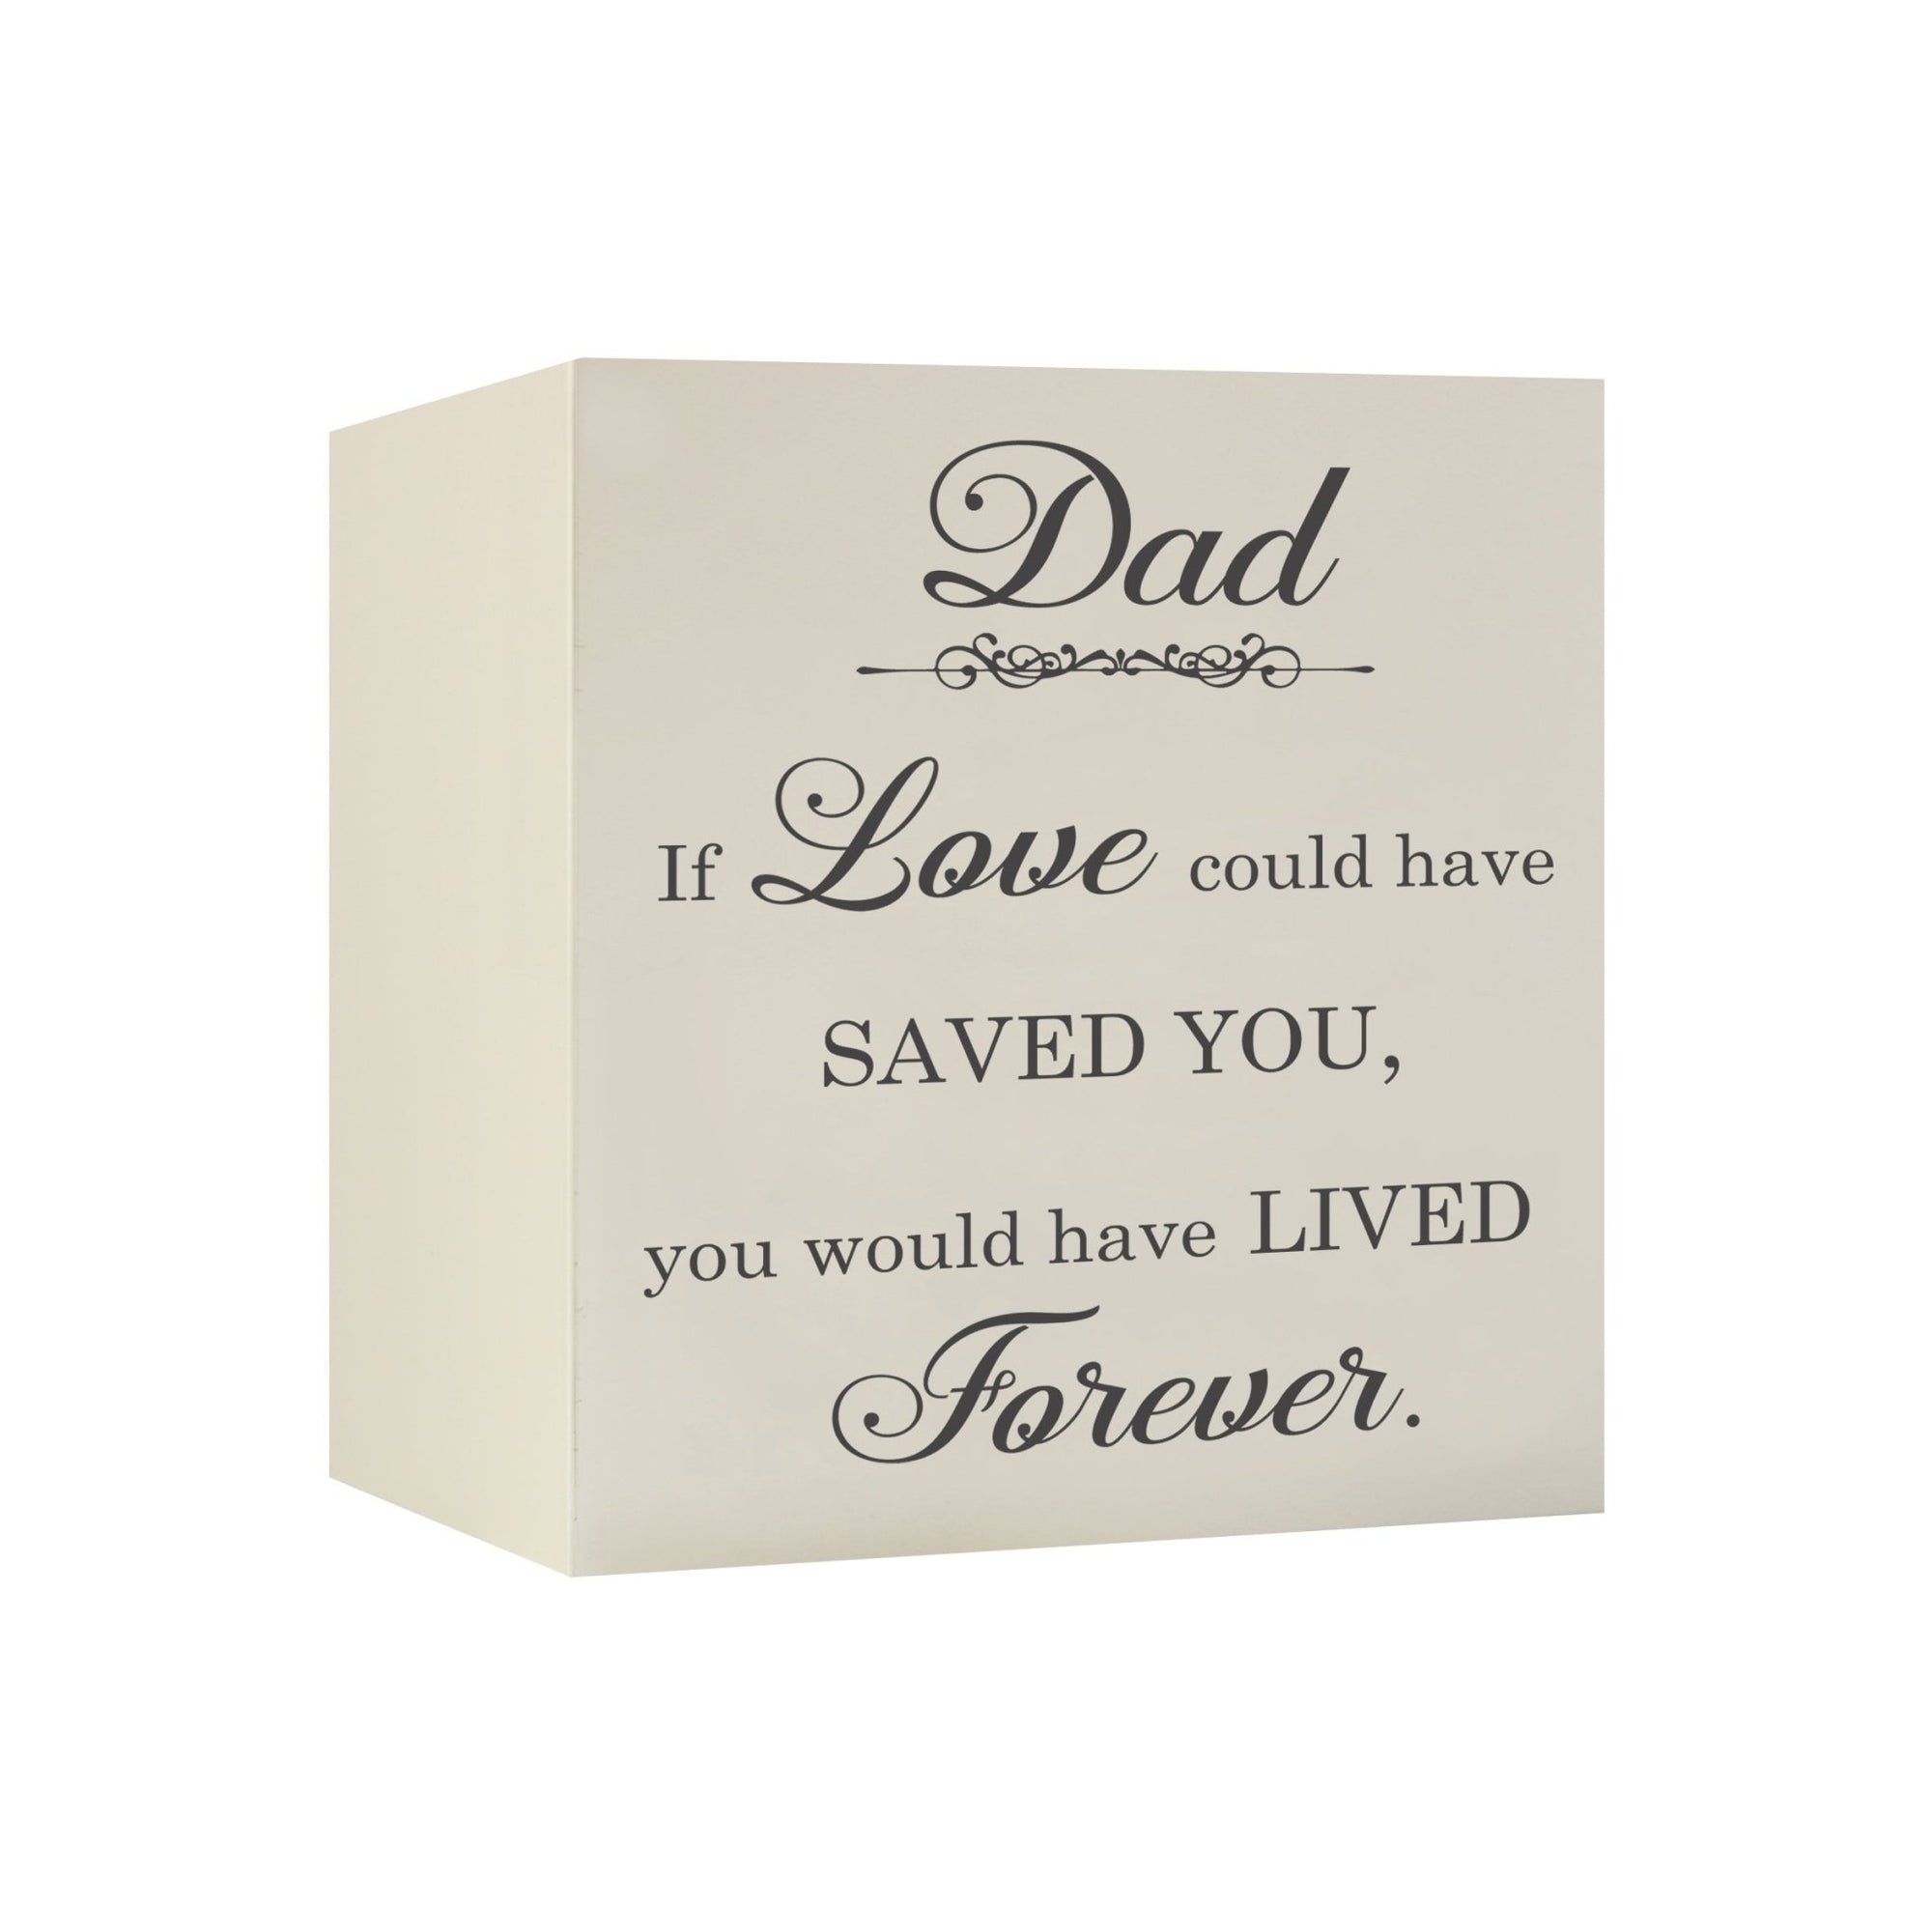 Memorial Bereavement Keepsake Cremation Shadow Box and Urn 6x6in Holds 53 Cu Inches Of Human Ashes Dad, If Love Could - LifeSong Milestones